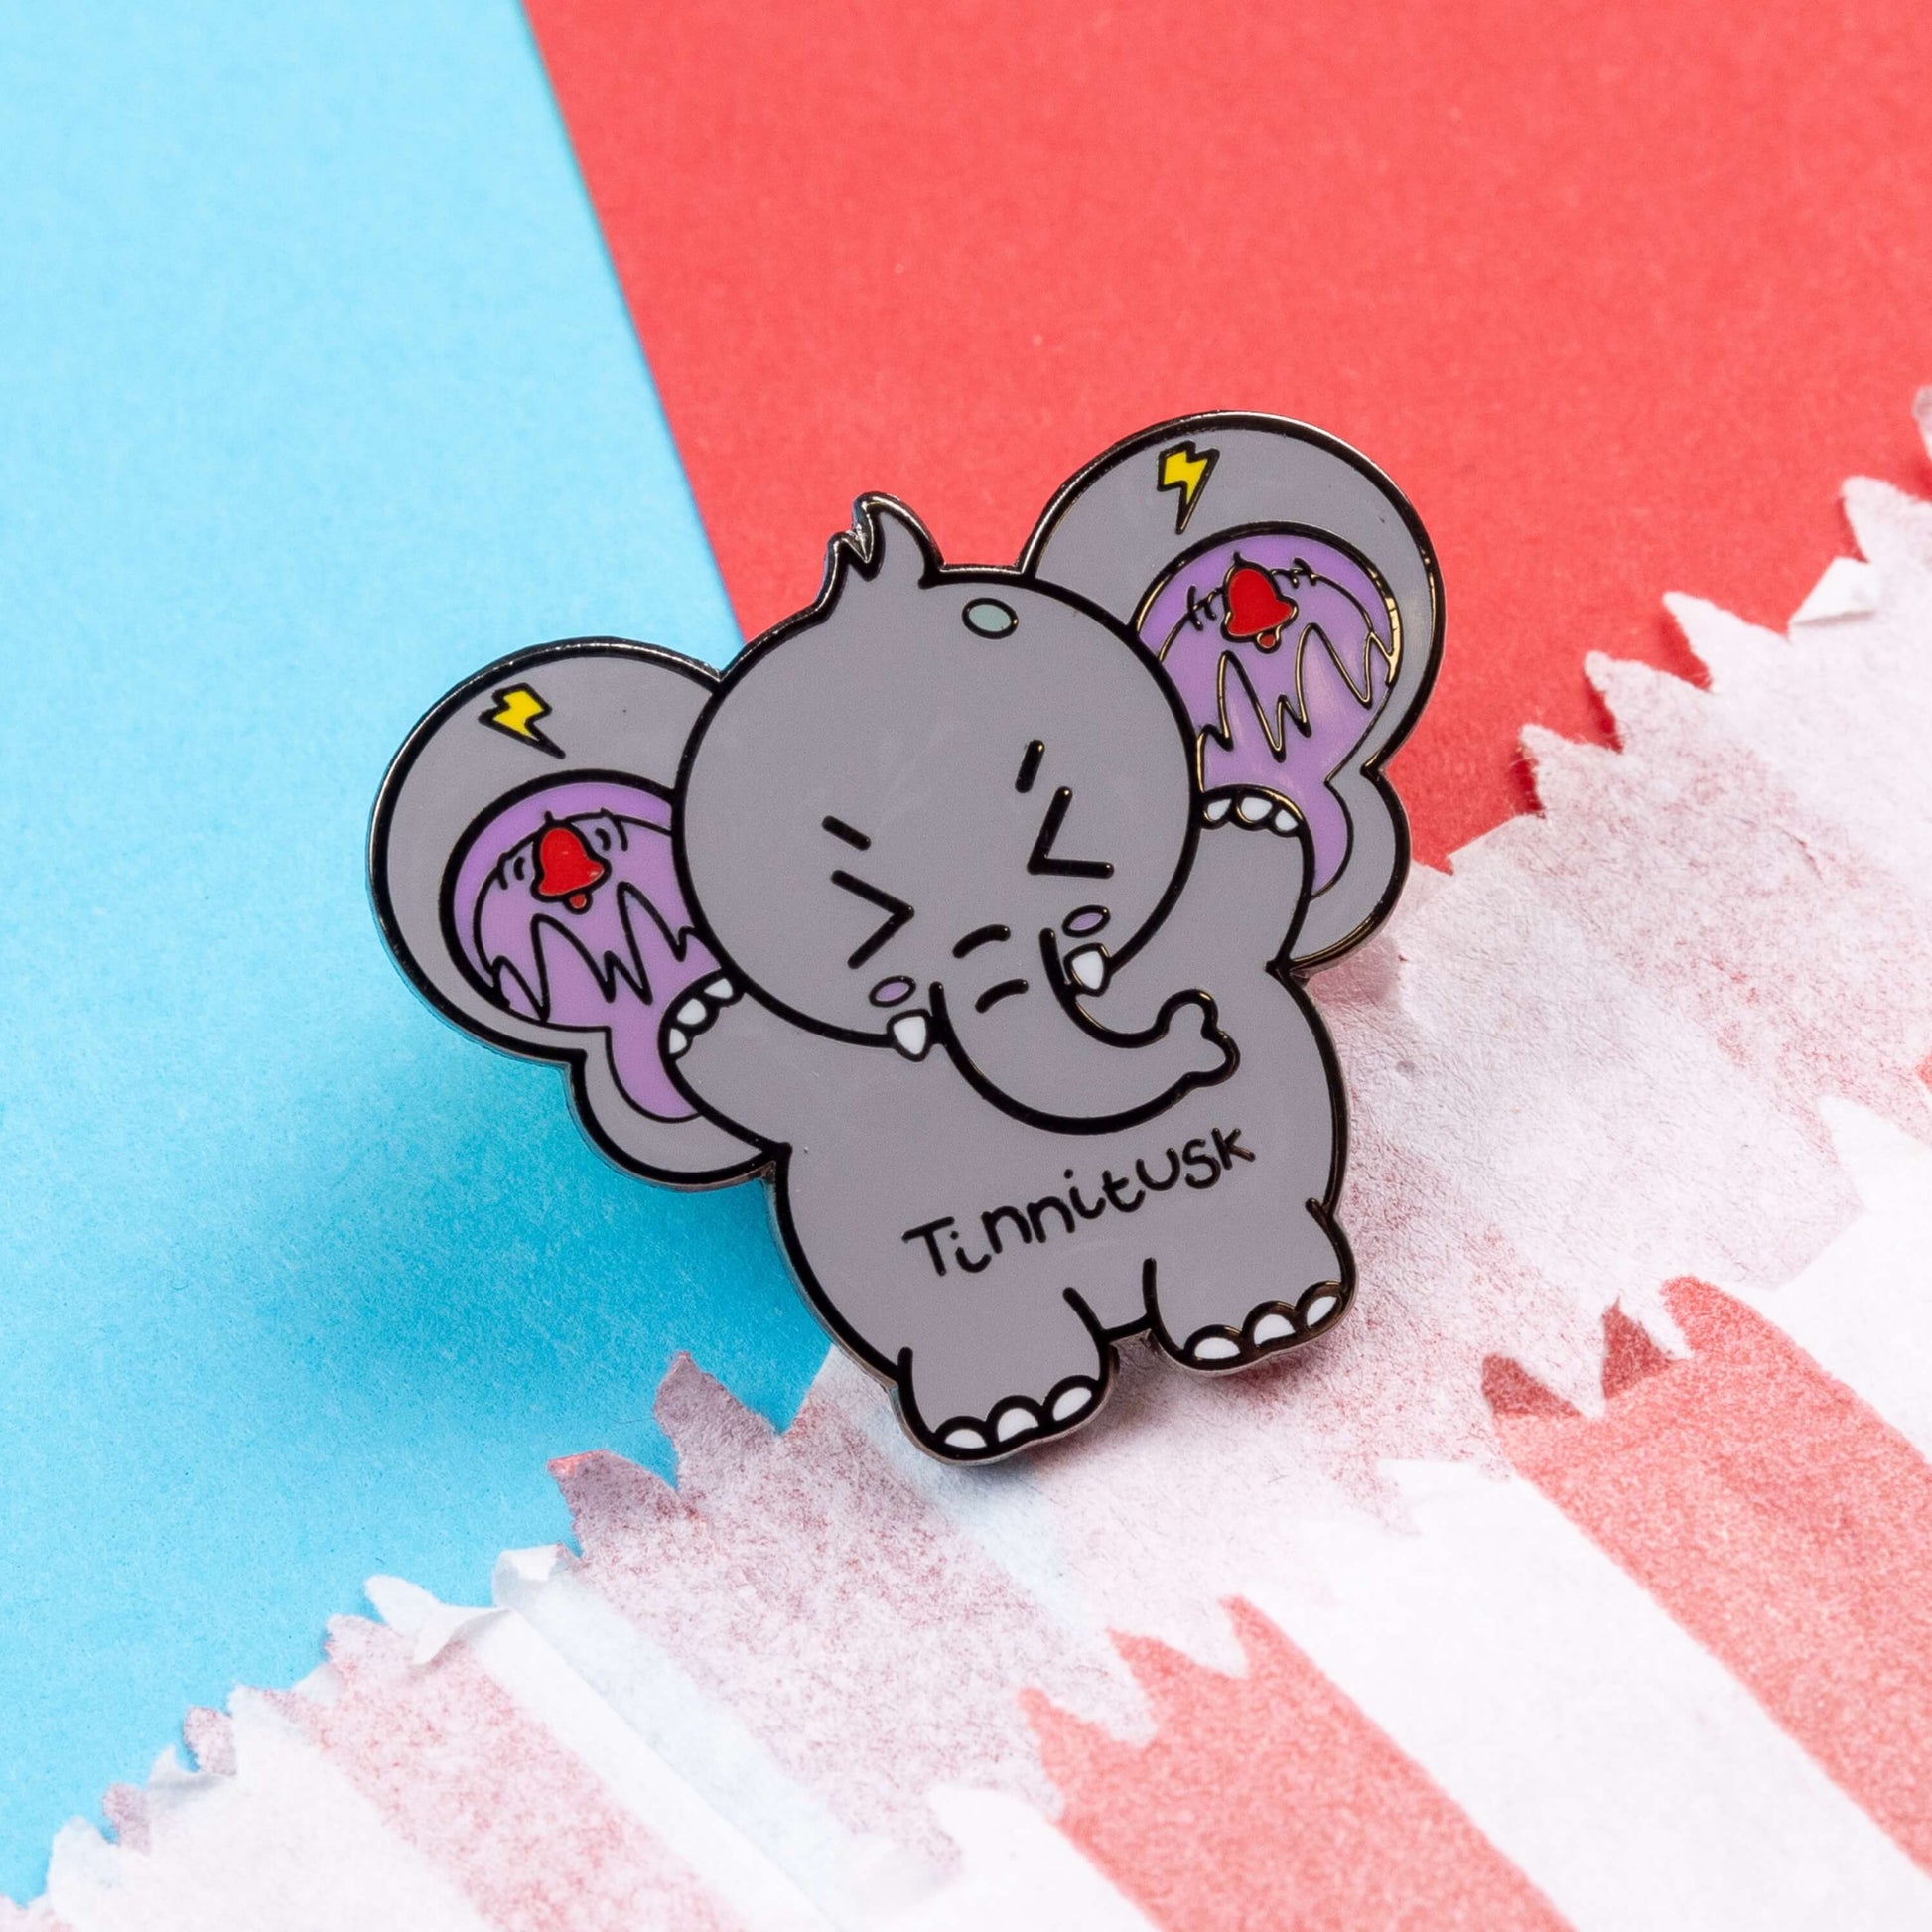 Tinnitus Enamel Pin on blue and red card. A grey elephant shaped enamel pin with big ears with purple on the inside of them and black squiggly lines with red ringing alarm bells above the lines and yellow lightening bolts above the bells. The elephant has its eyes screwed shut and its arms up. 'Tinnitusk' is written in black across its middle.